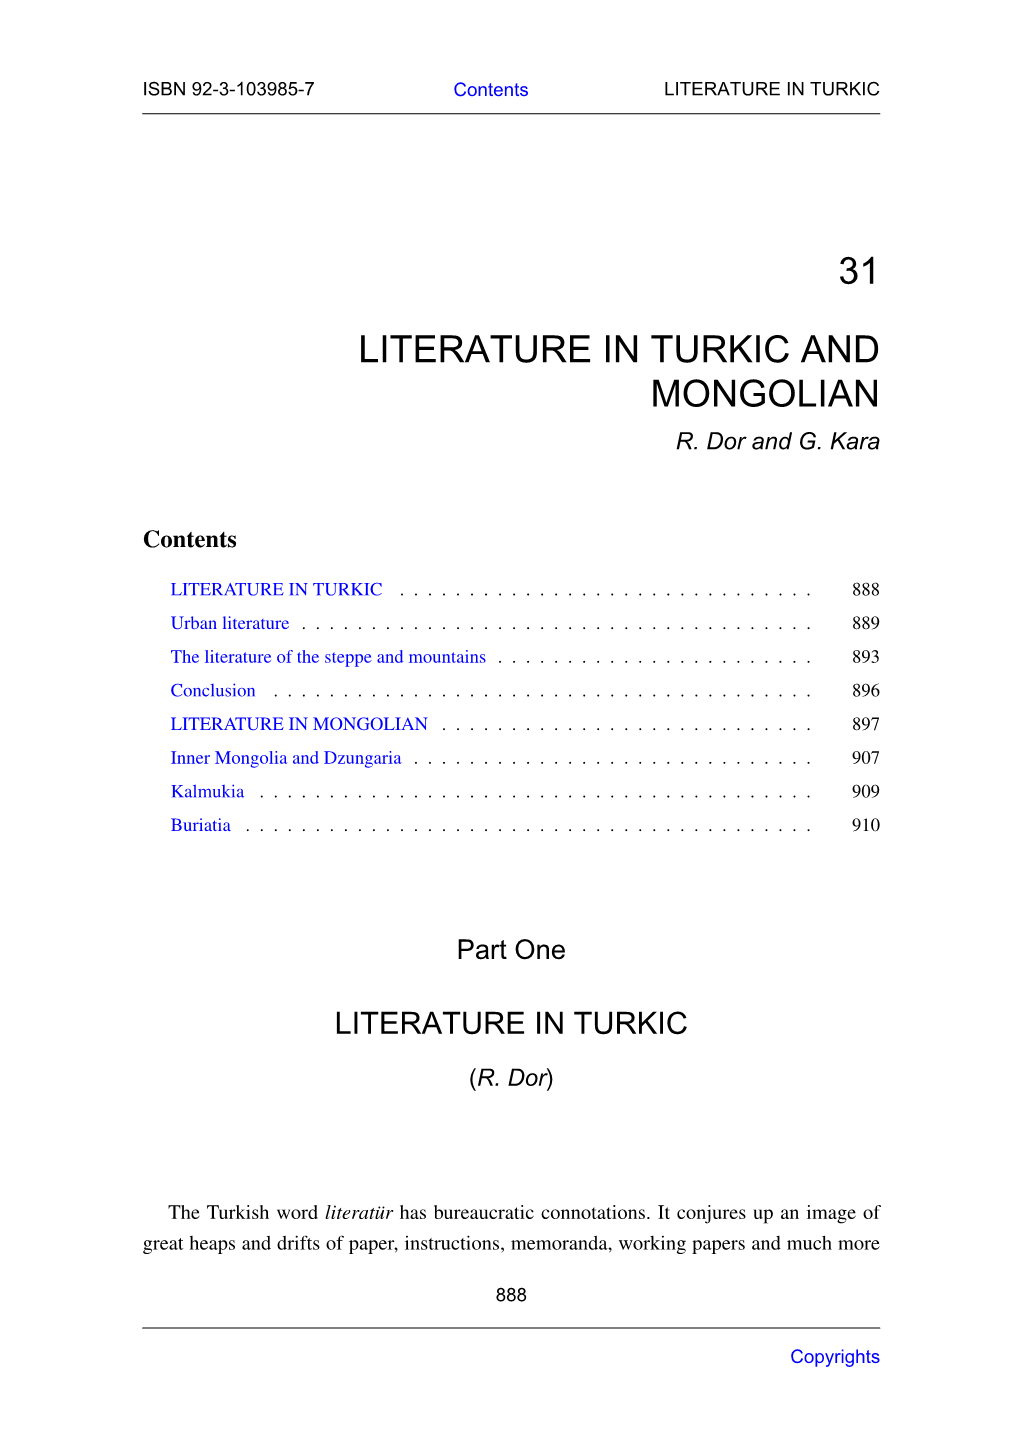 31 Literature in Turkic and Mongolian